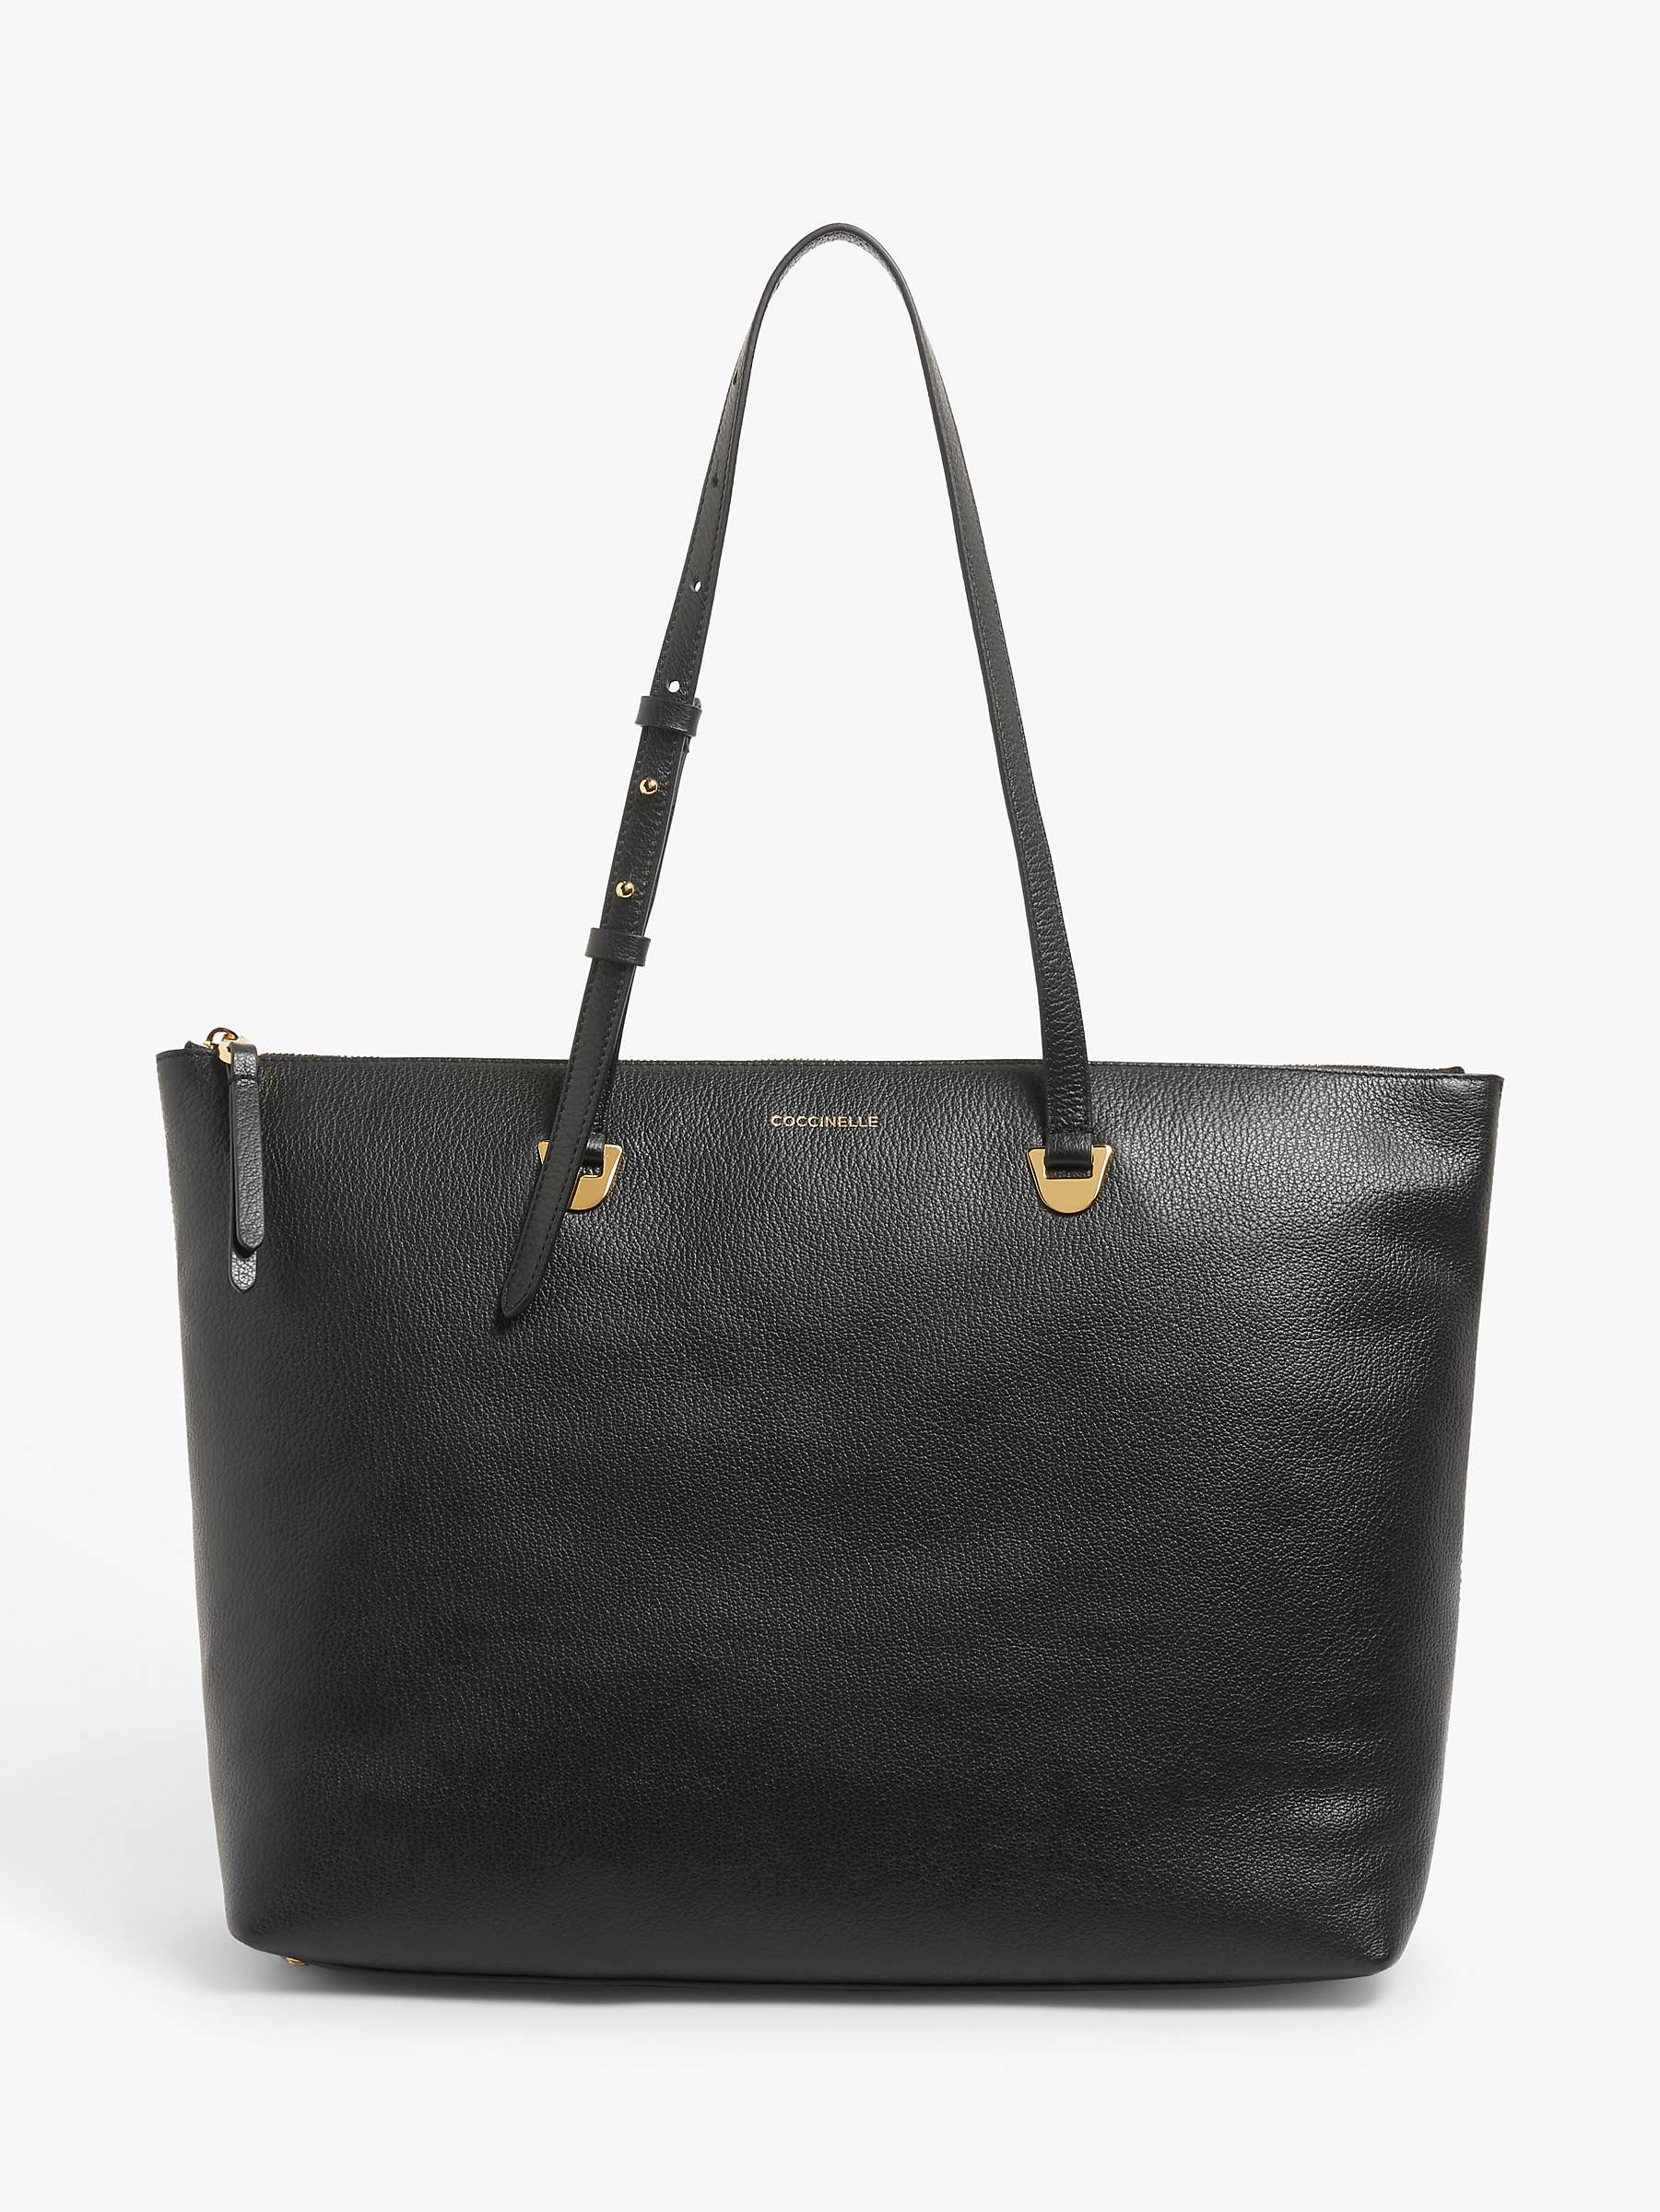 Buy Coccinelle Lea Leather Zip Top Tote Bag Online at johnlewis.com